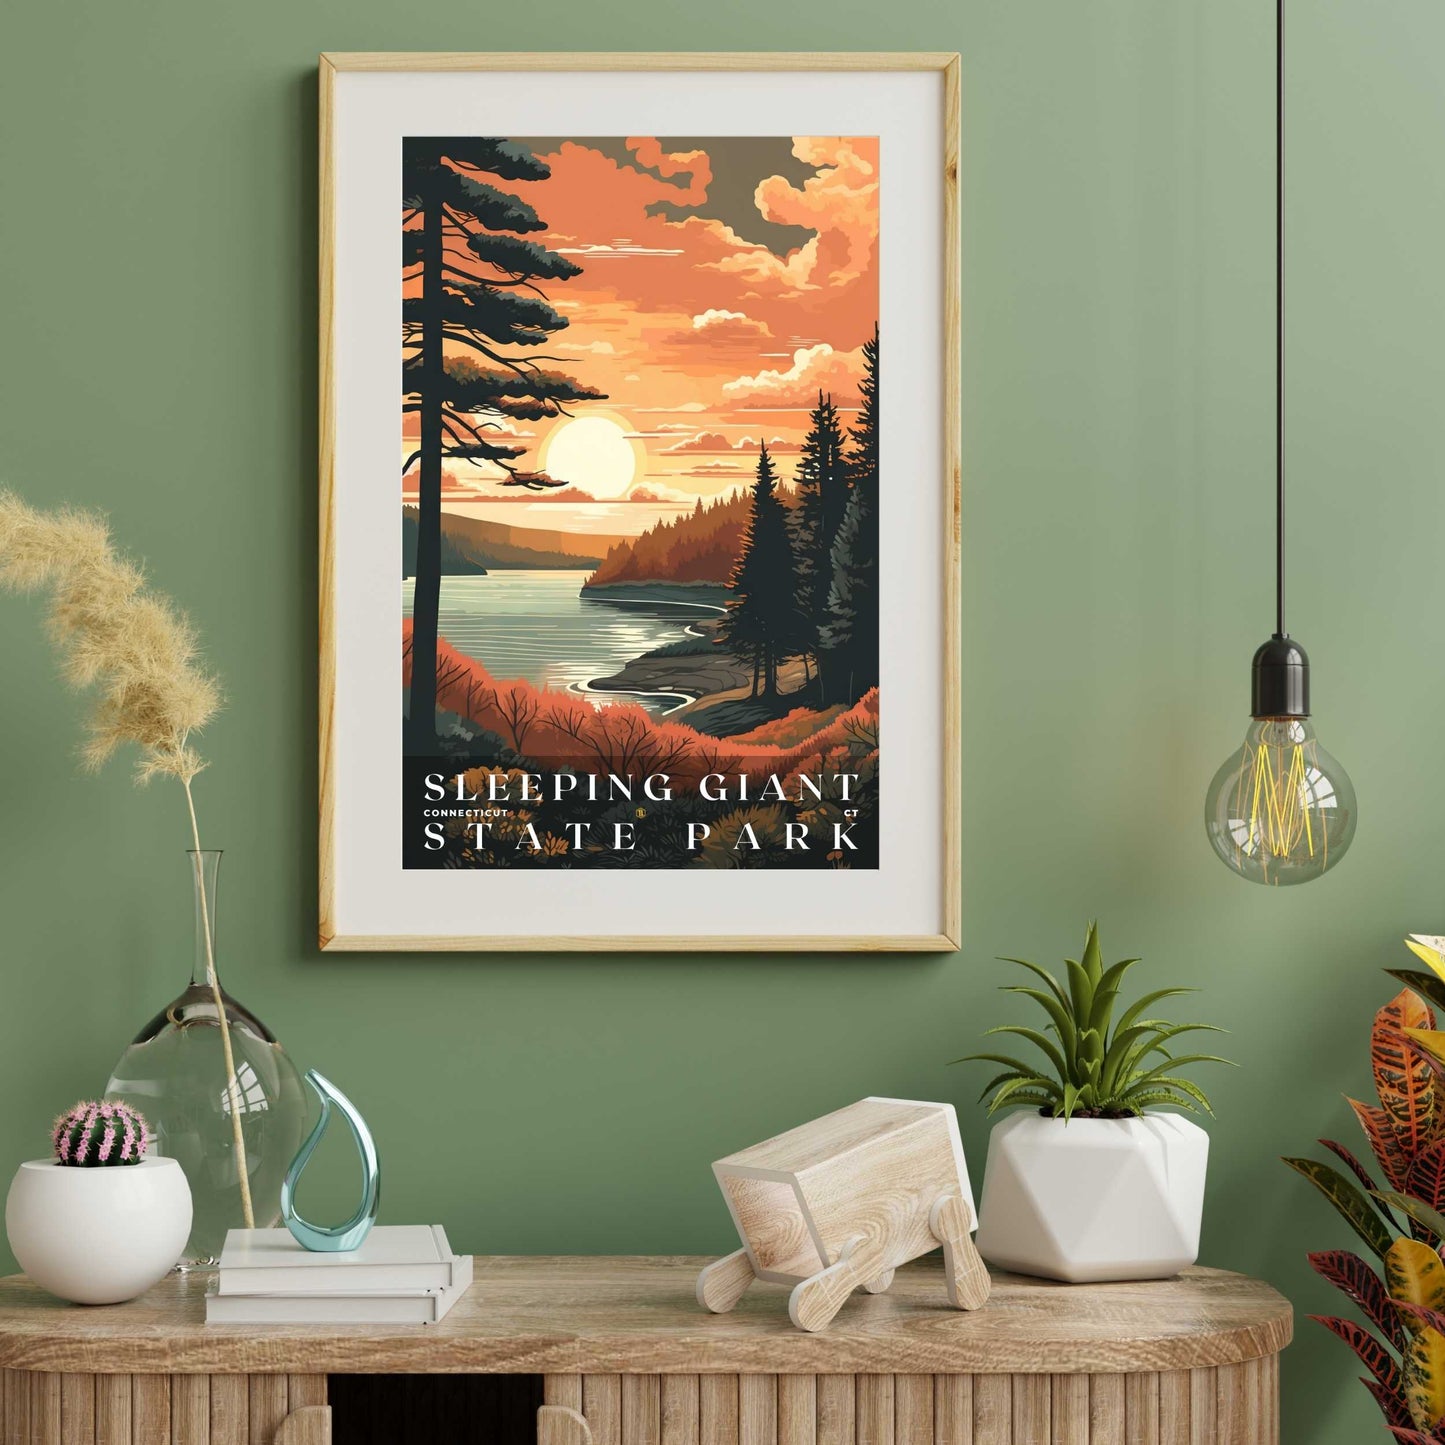 Sleeping Giant State Park Poster | US Travel | S01